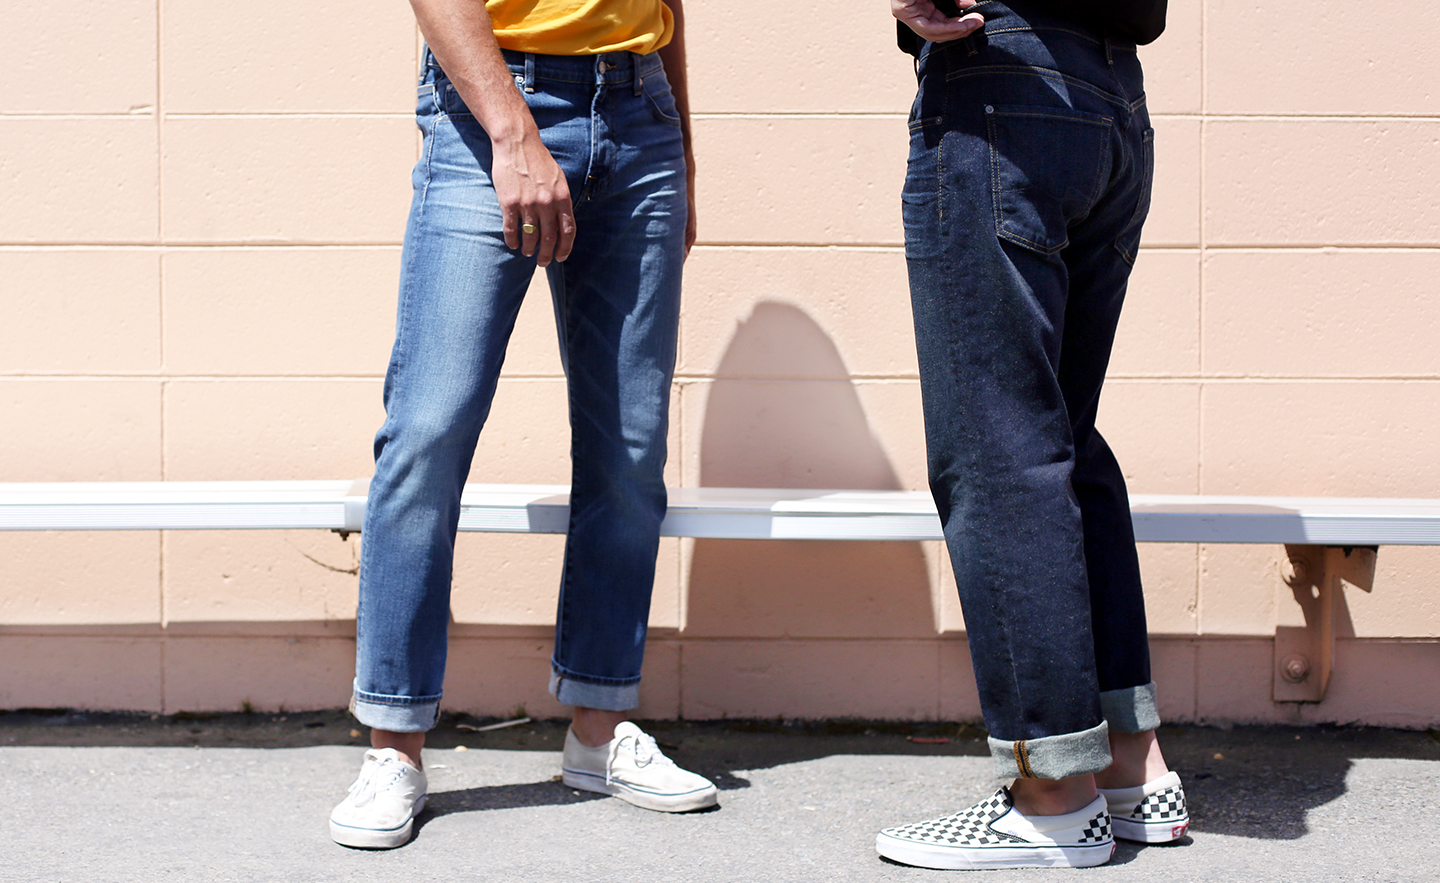 2 WAYS TO WEAR 7 FOR ALL MANKIND JEANS